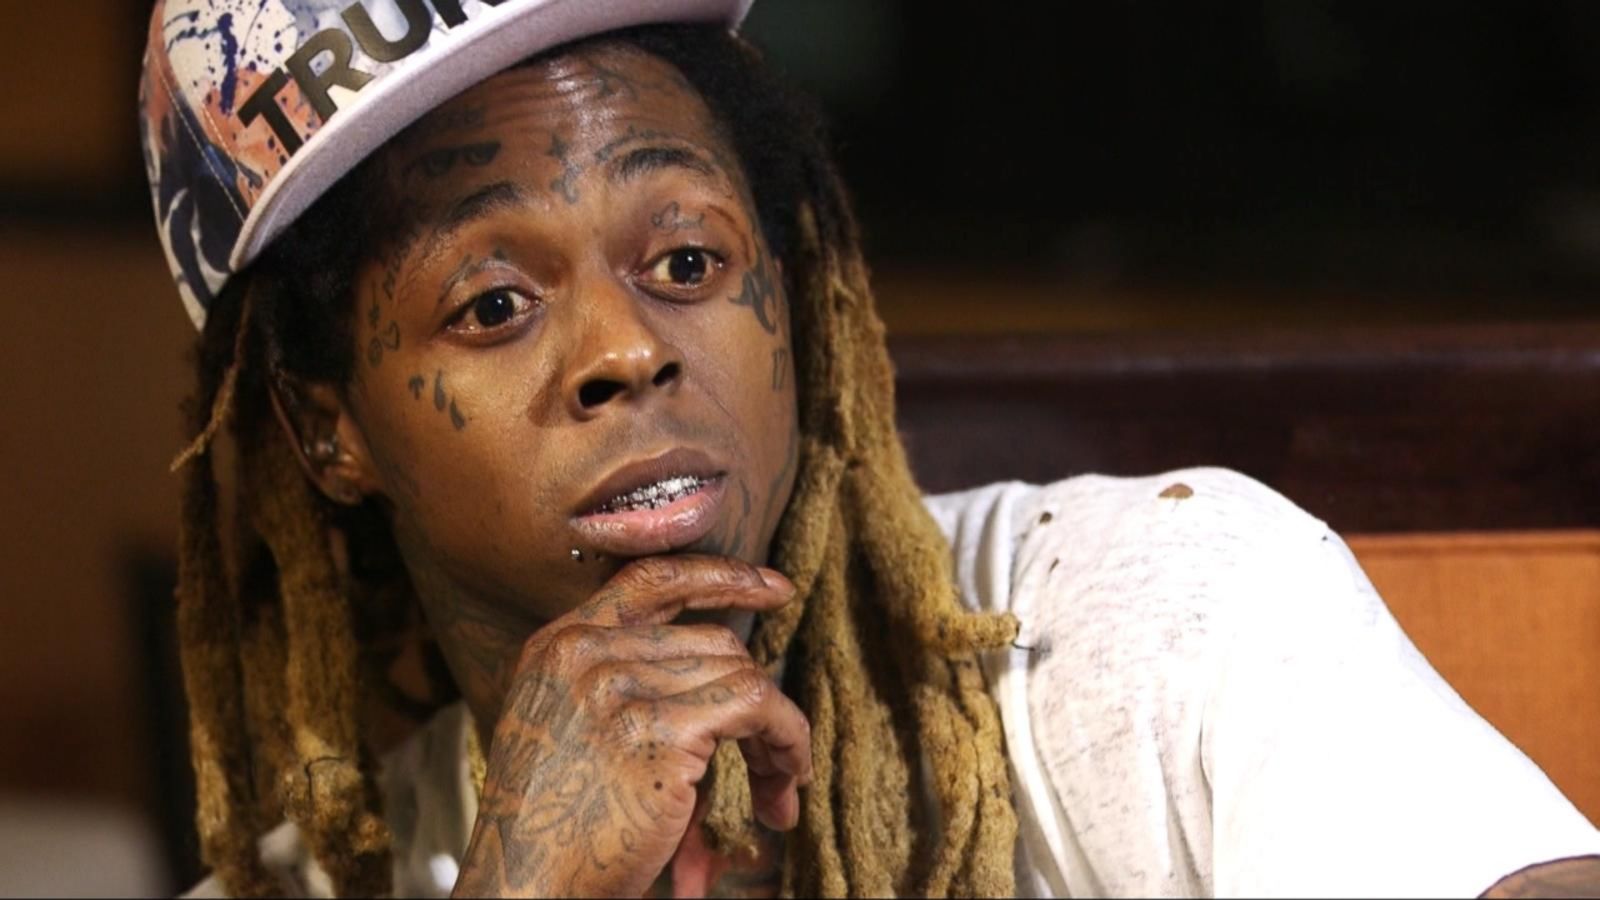 Lil Wayne Completely Embarrassed Himself When Asked About 'Black Lives